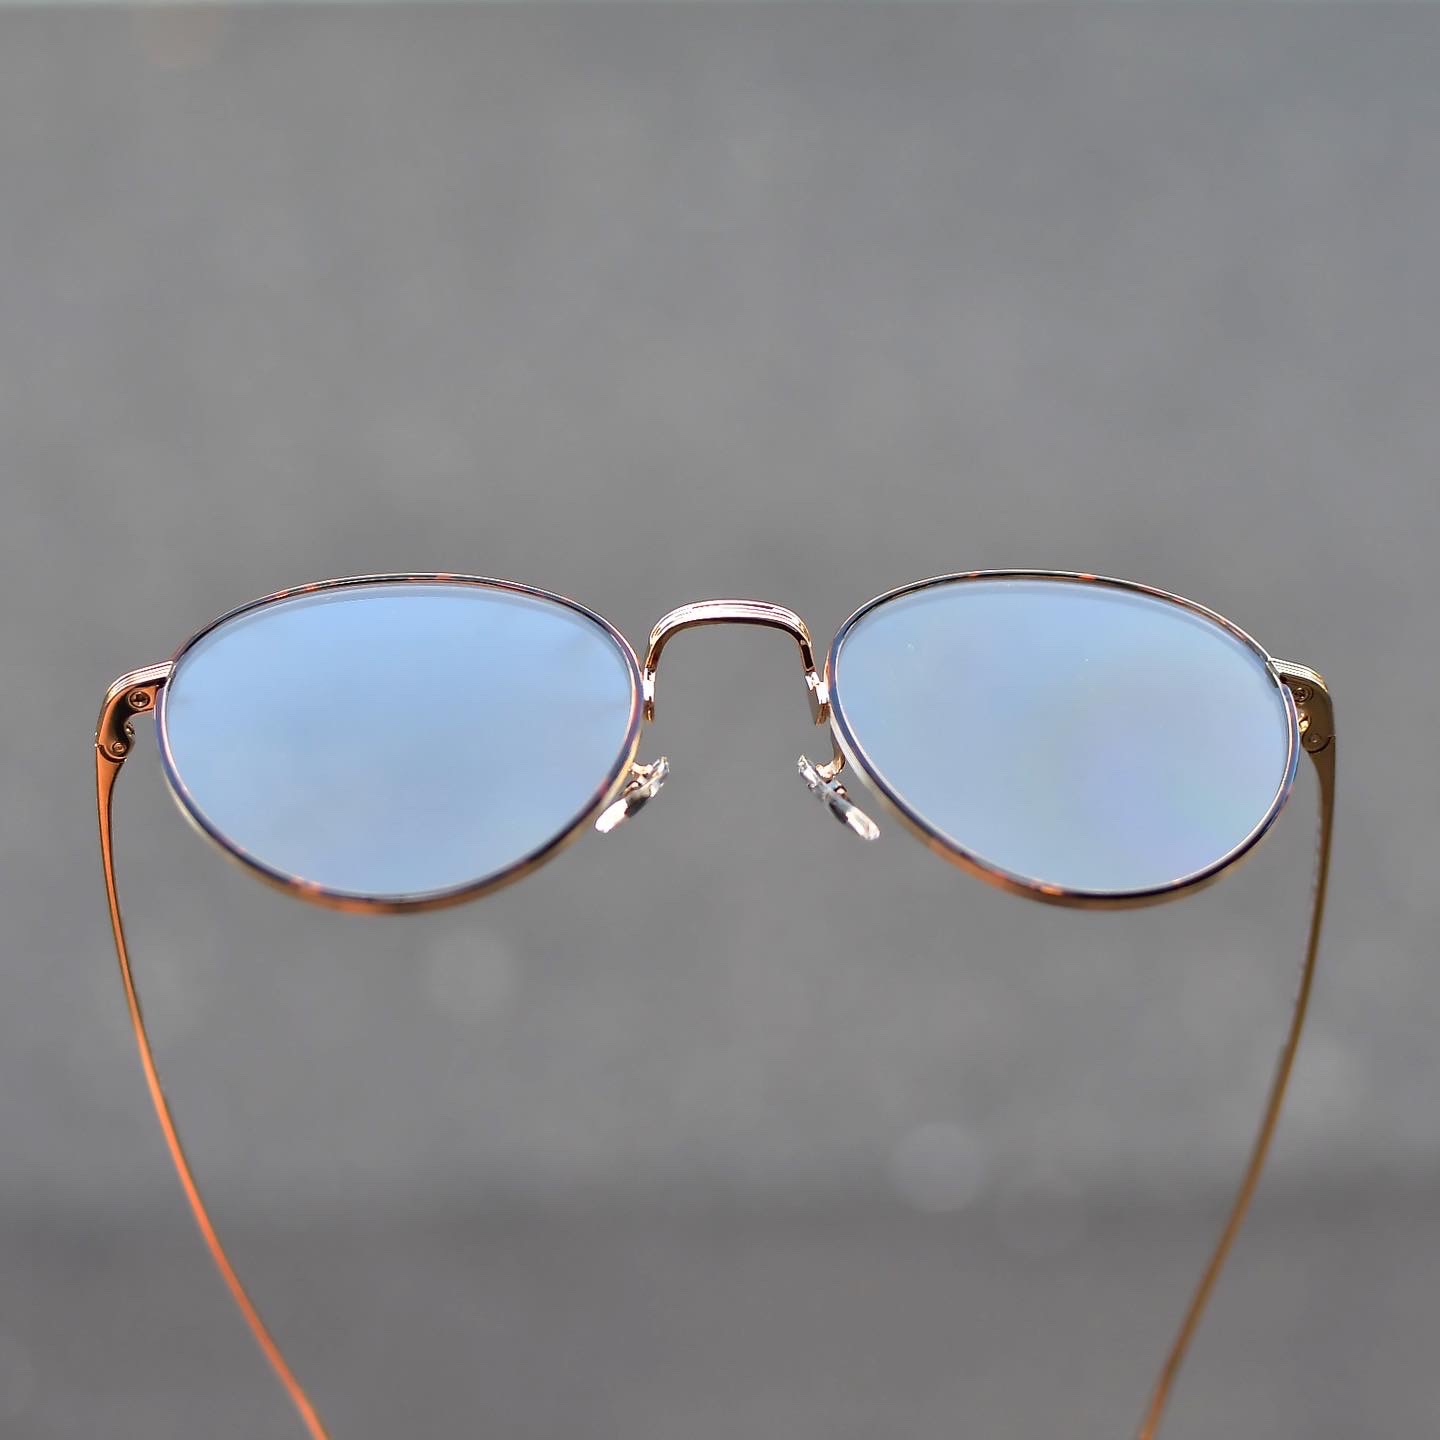 OLIVER PEOPLES × THE ROW BROWN STONE2 | GLEAM OPTICAL 福岡 |  北九州市小倉のメガネ店（めがね・眼鏡・サングラス）